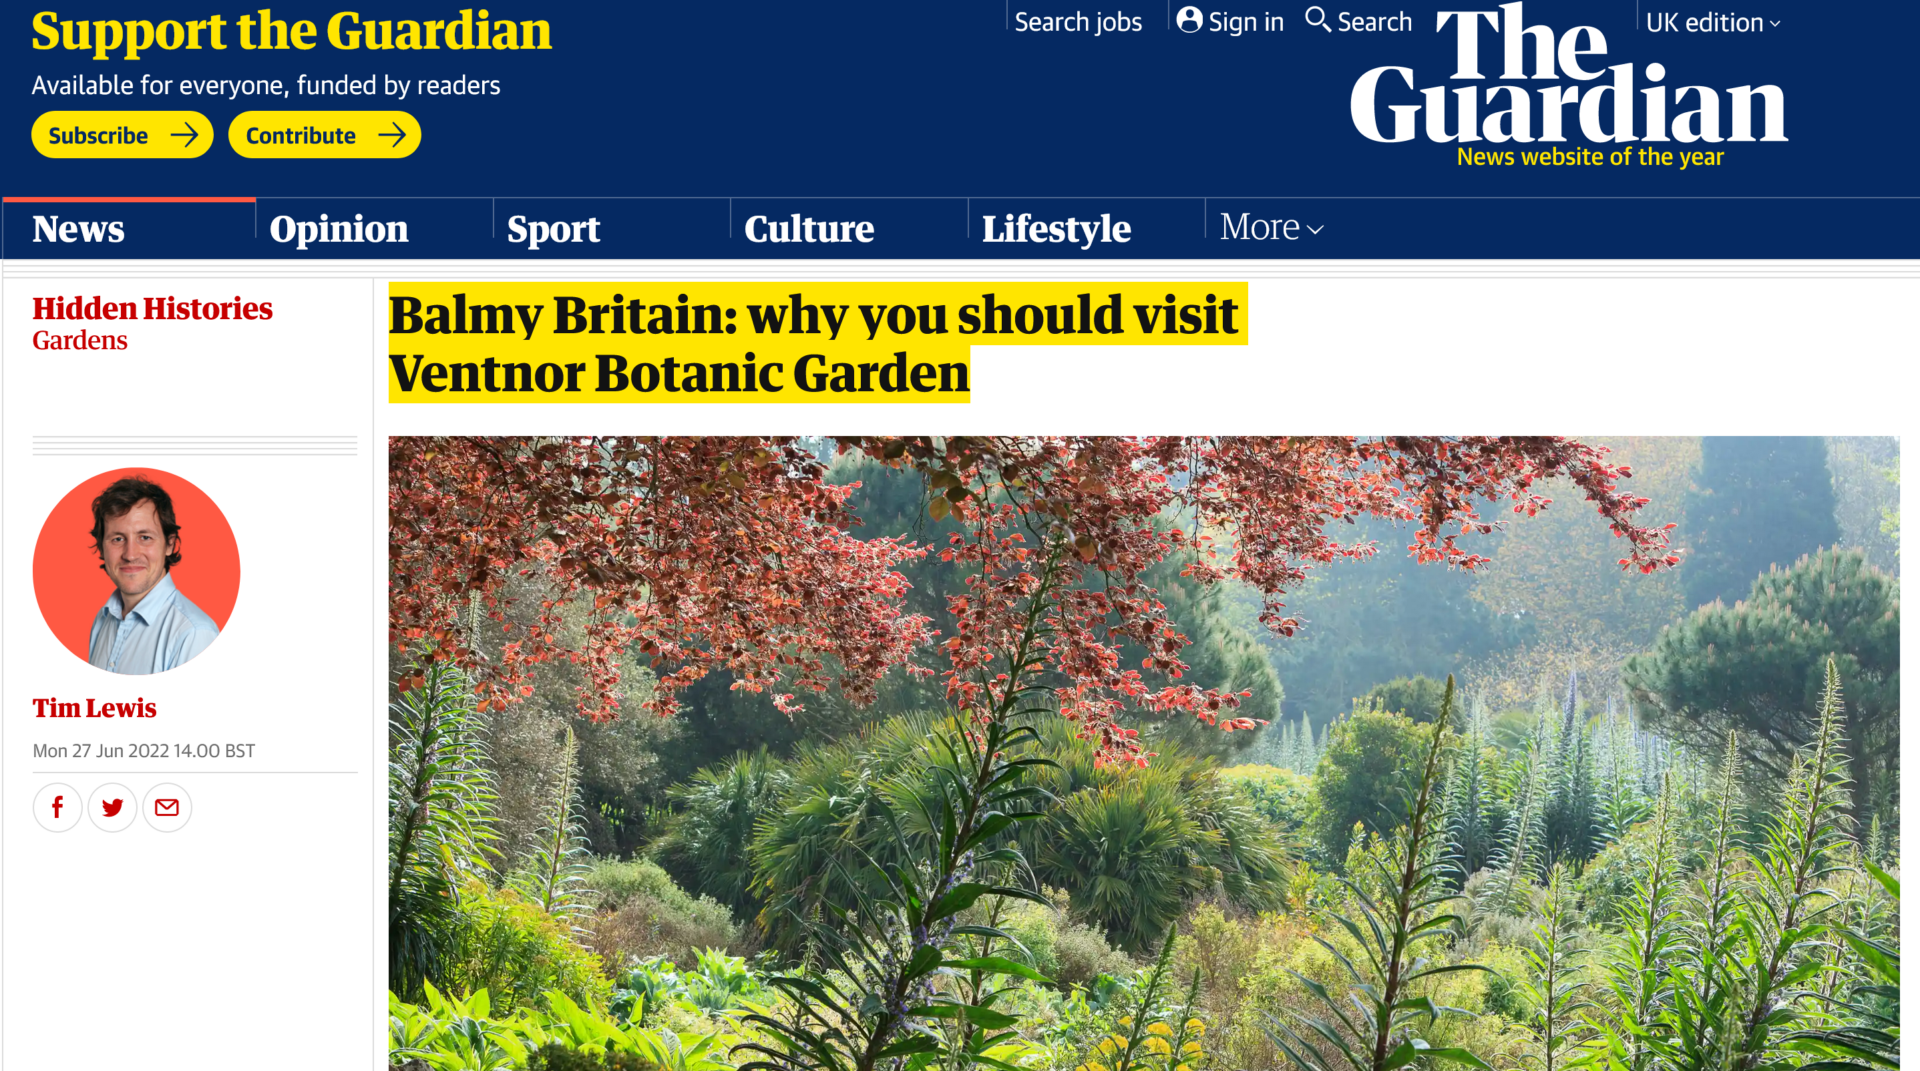 A website screenshot taken from a recent article in the Guardian news paper online showing an image of Ventnor Botanic Garden with Writer Tim Lewis.